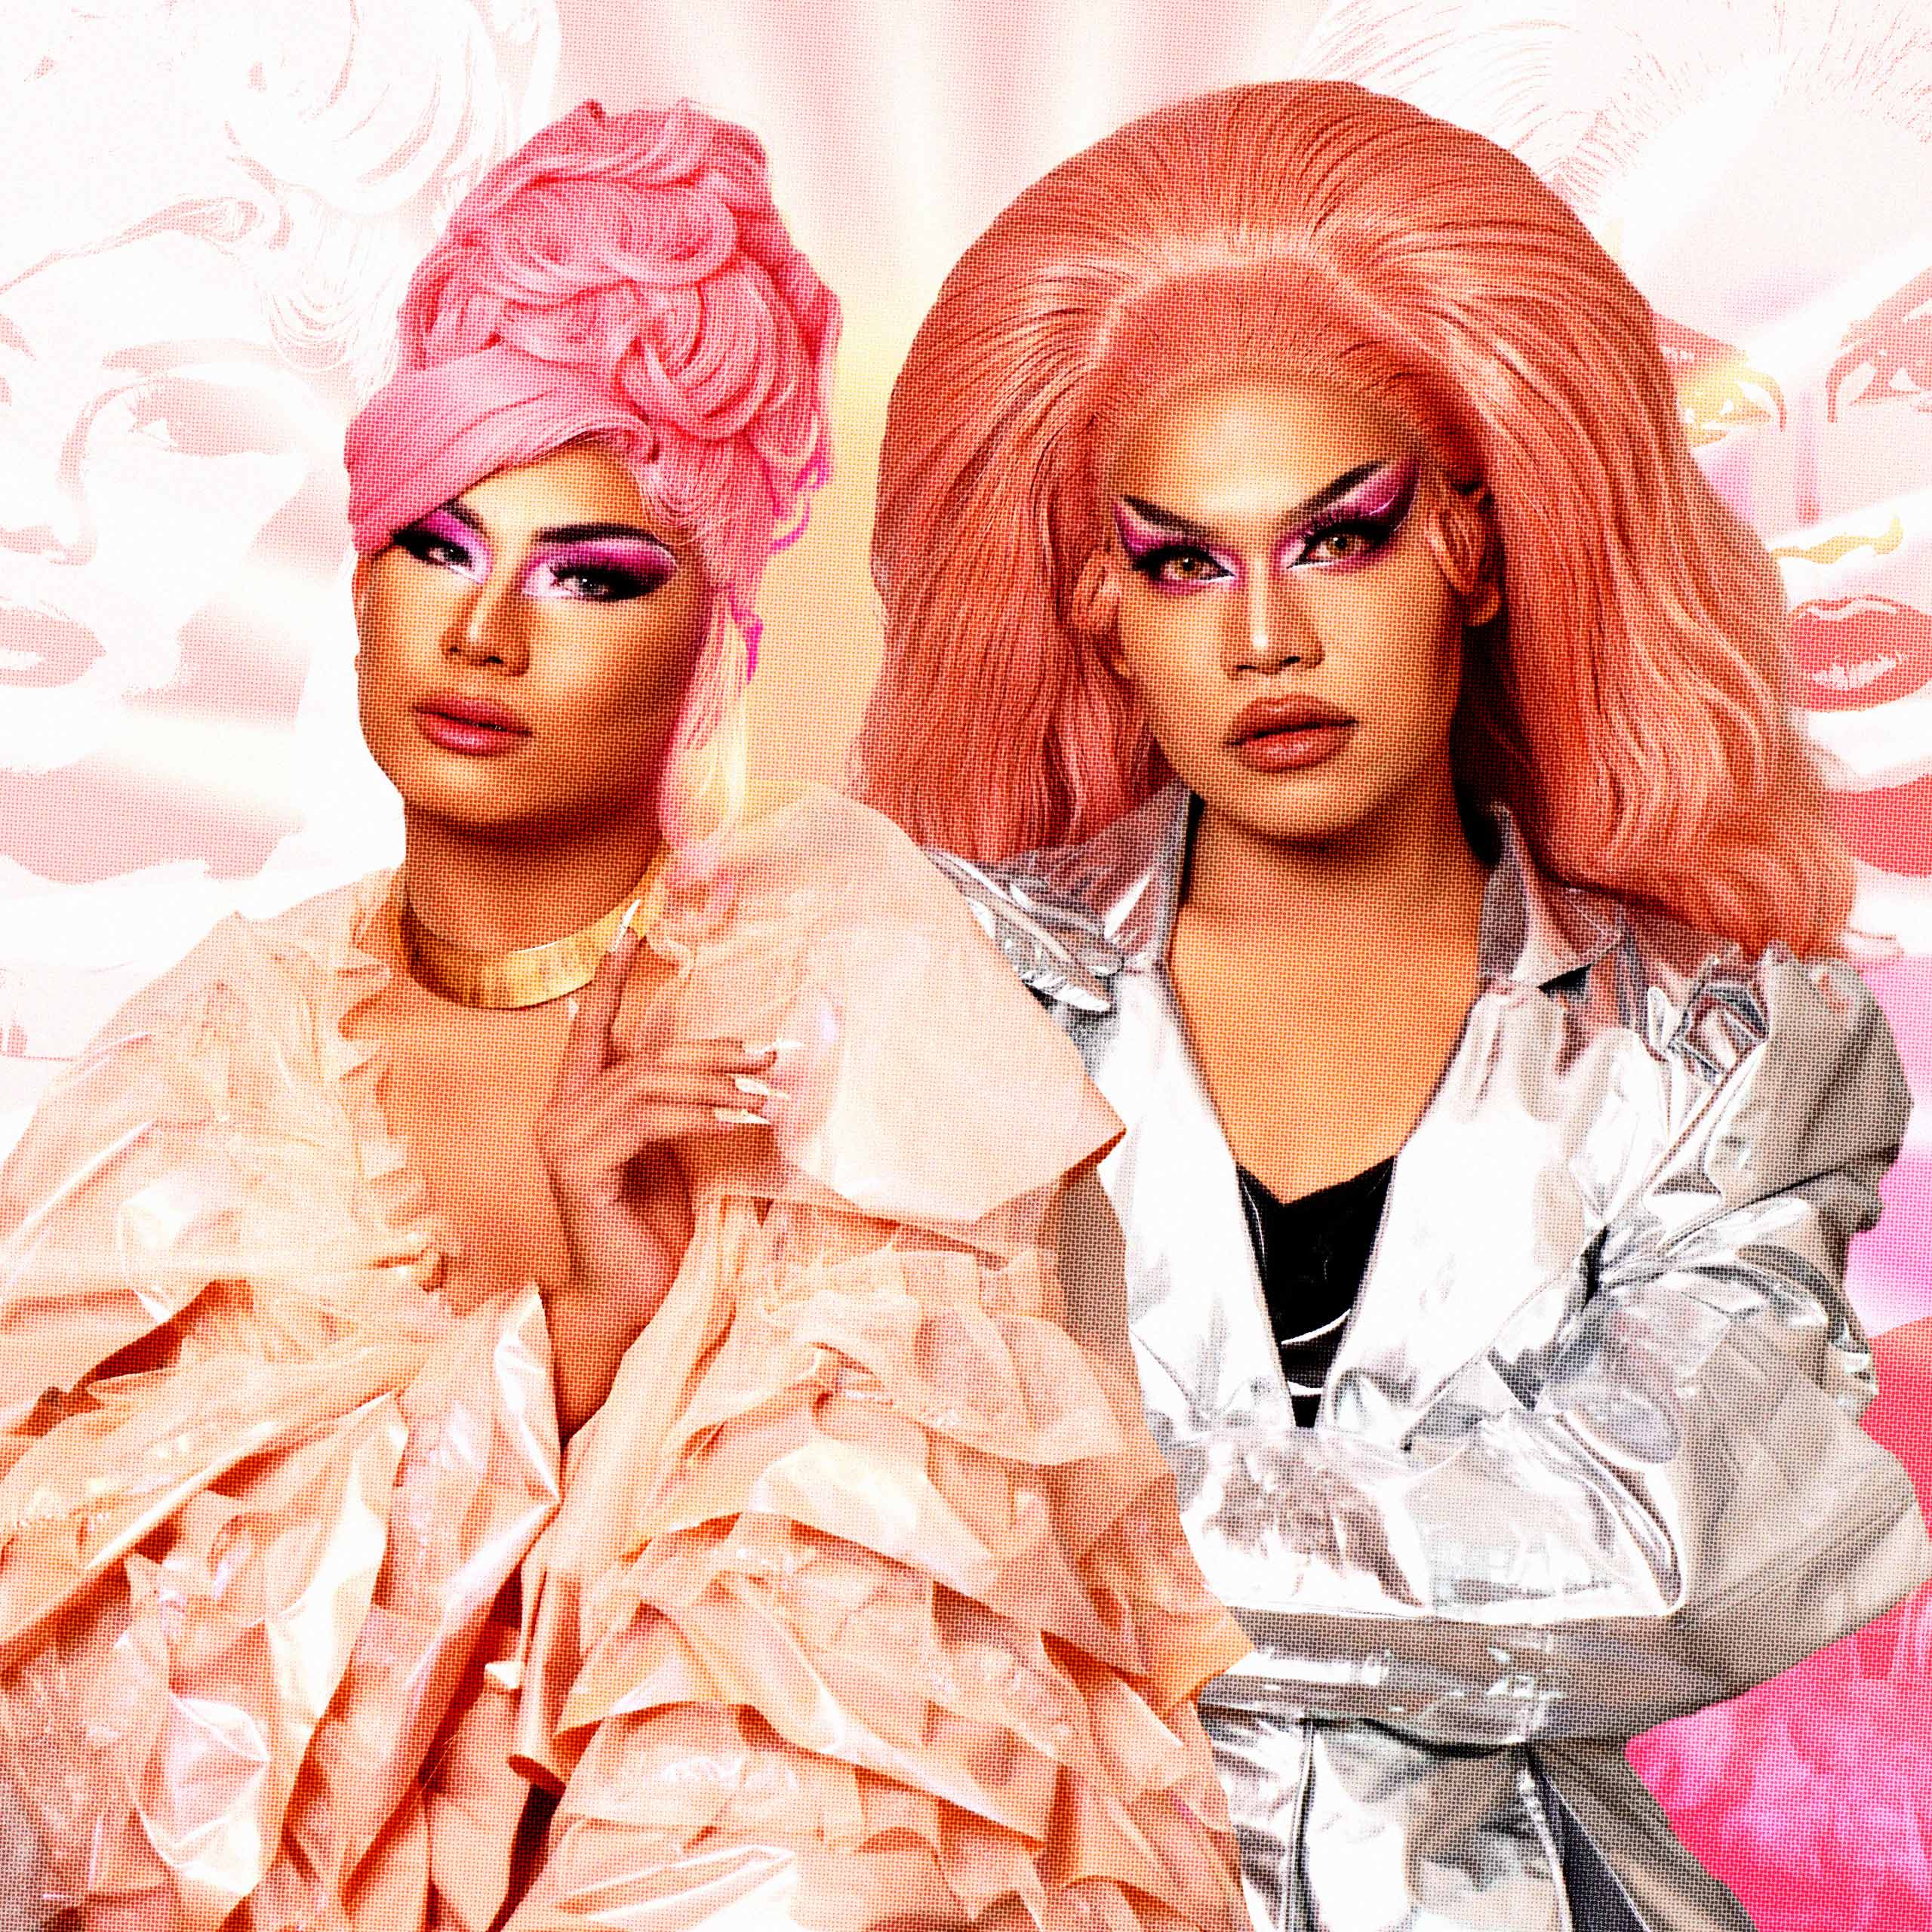 Gay Couple Dysco & Ezra Have Inspired Each Other With Their Shared Passion For Drag